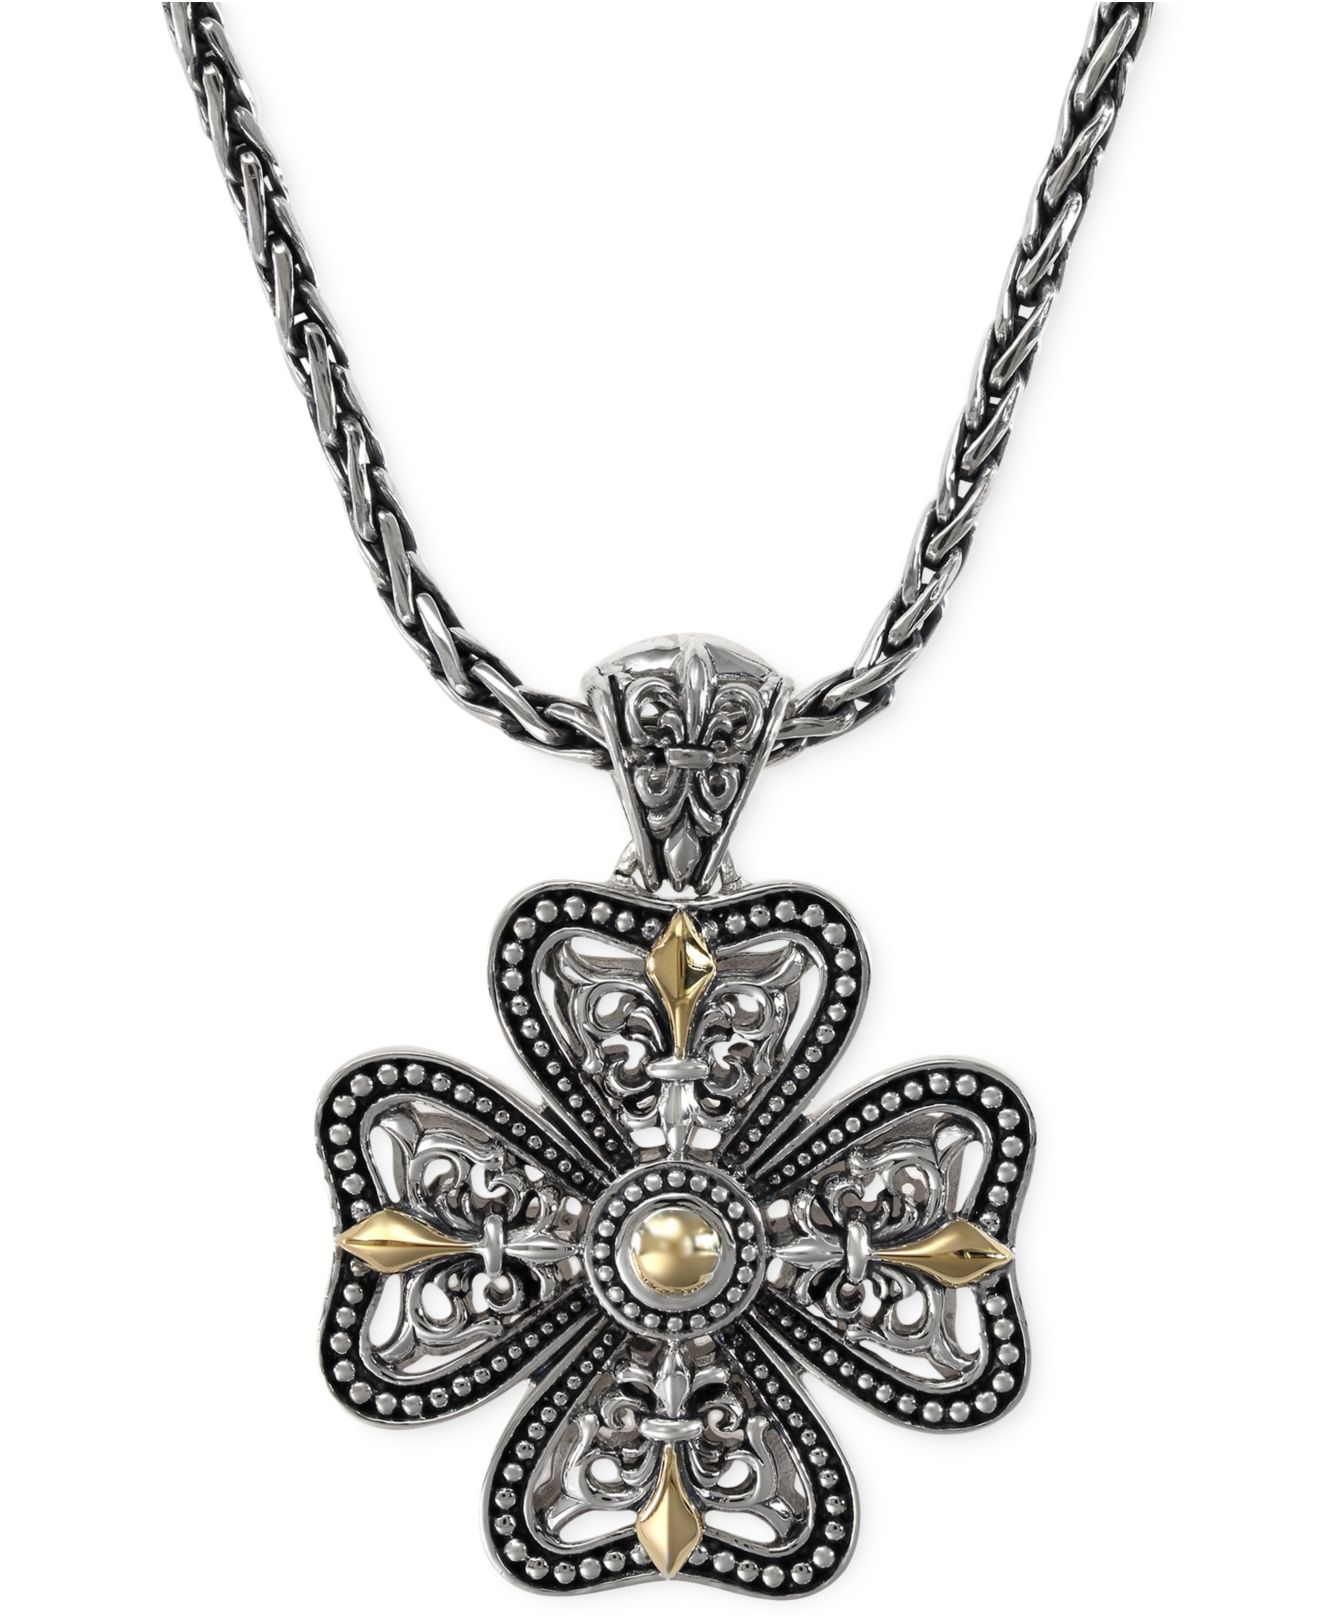 Lyst - Effy Collection Balissima By Effy Clover Pendant Necklace In 18k ...